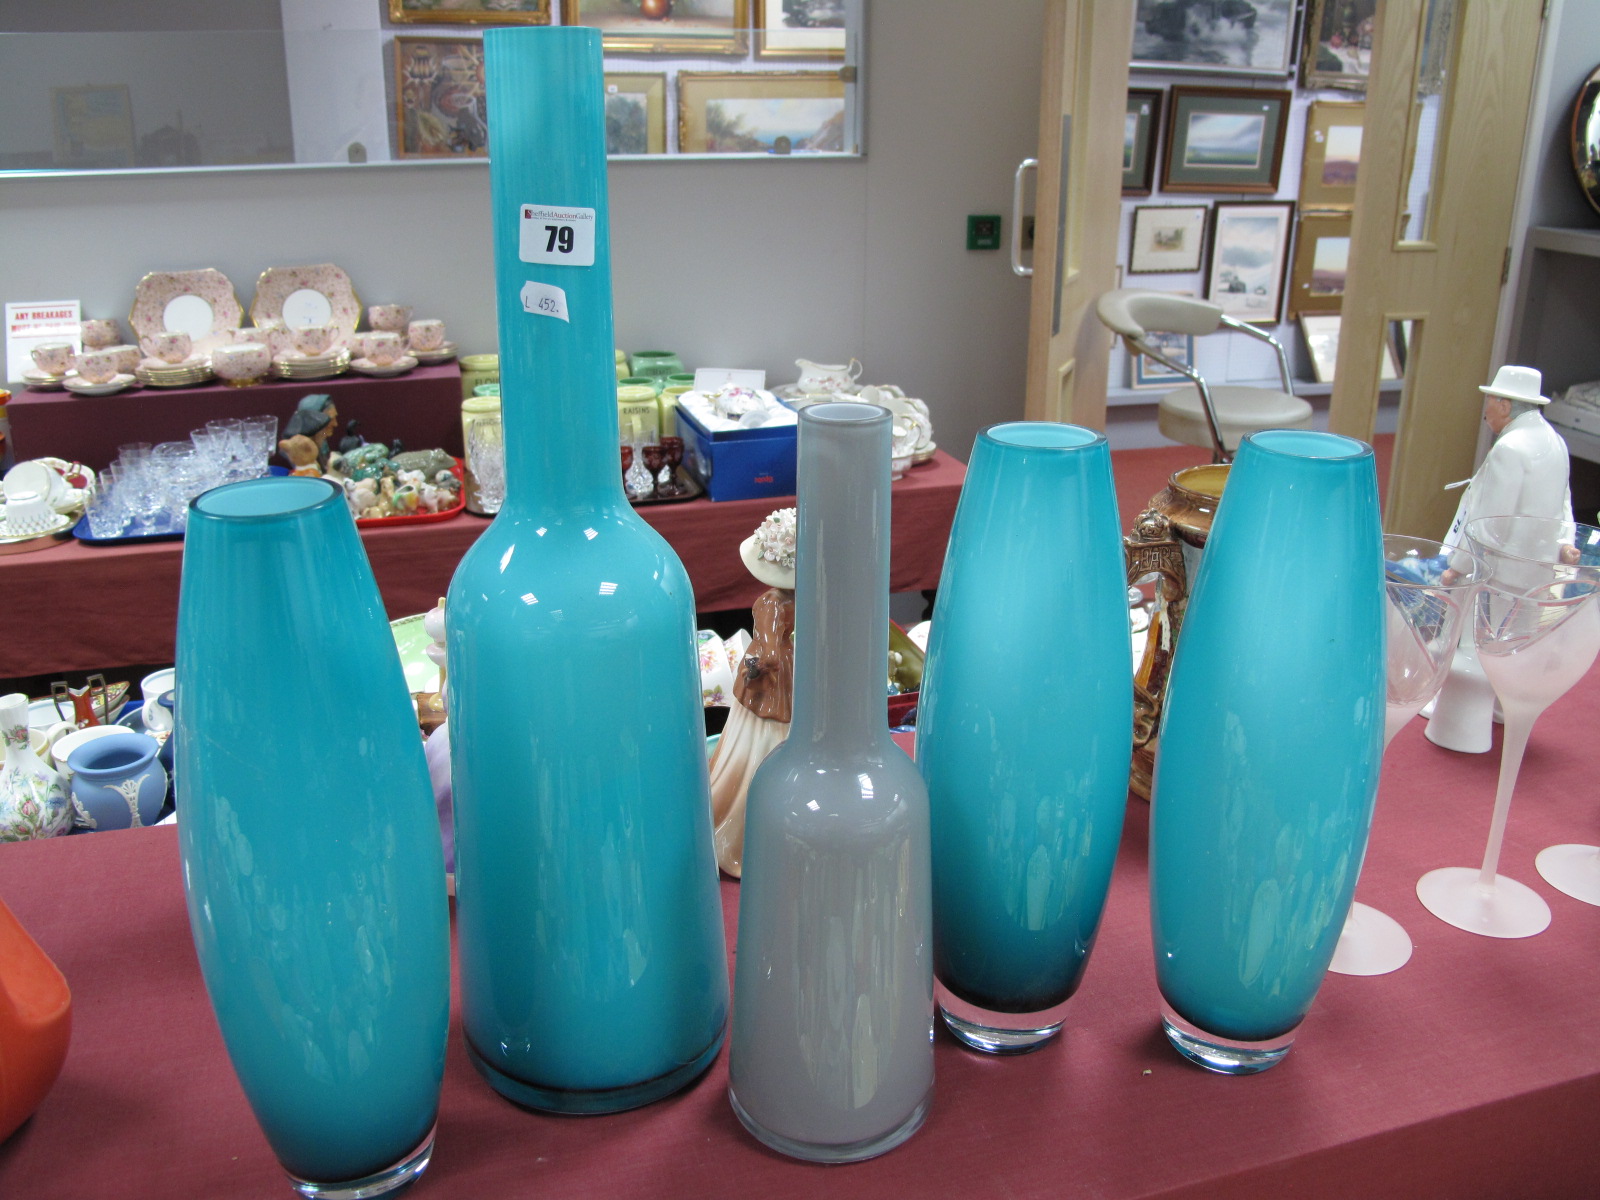 Three Villeroy and Boch Oval Turquoise Glass Vases, 30cm high, larger bottle vase, another in